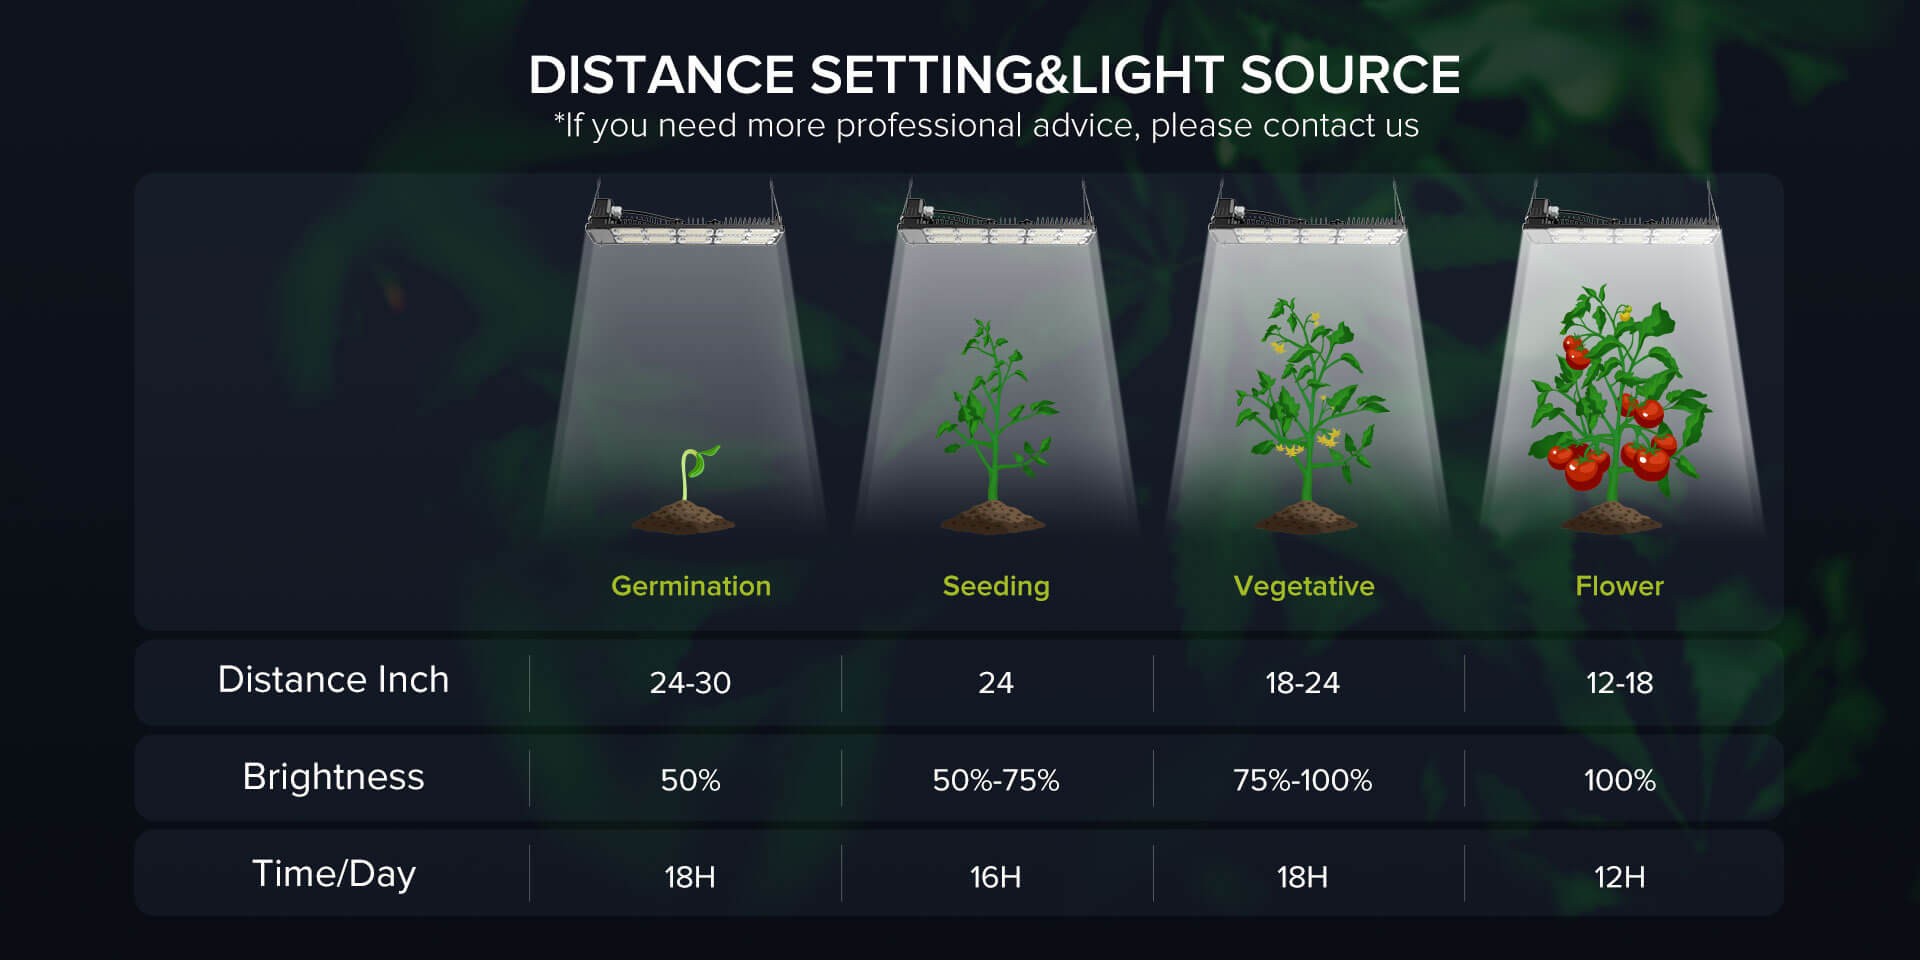 Distance setting, 50% brightness for germination stages